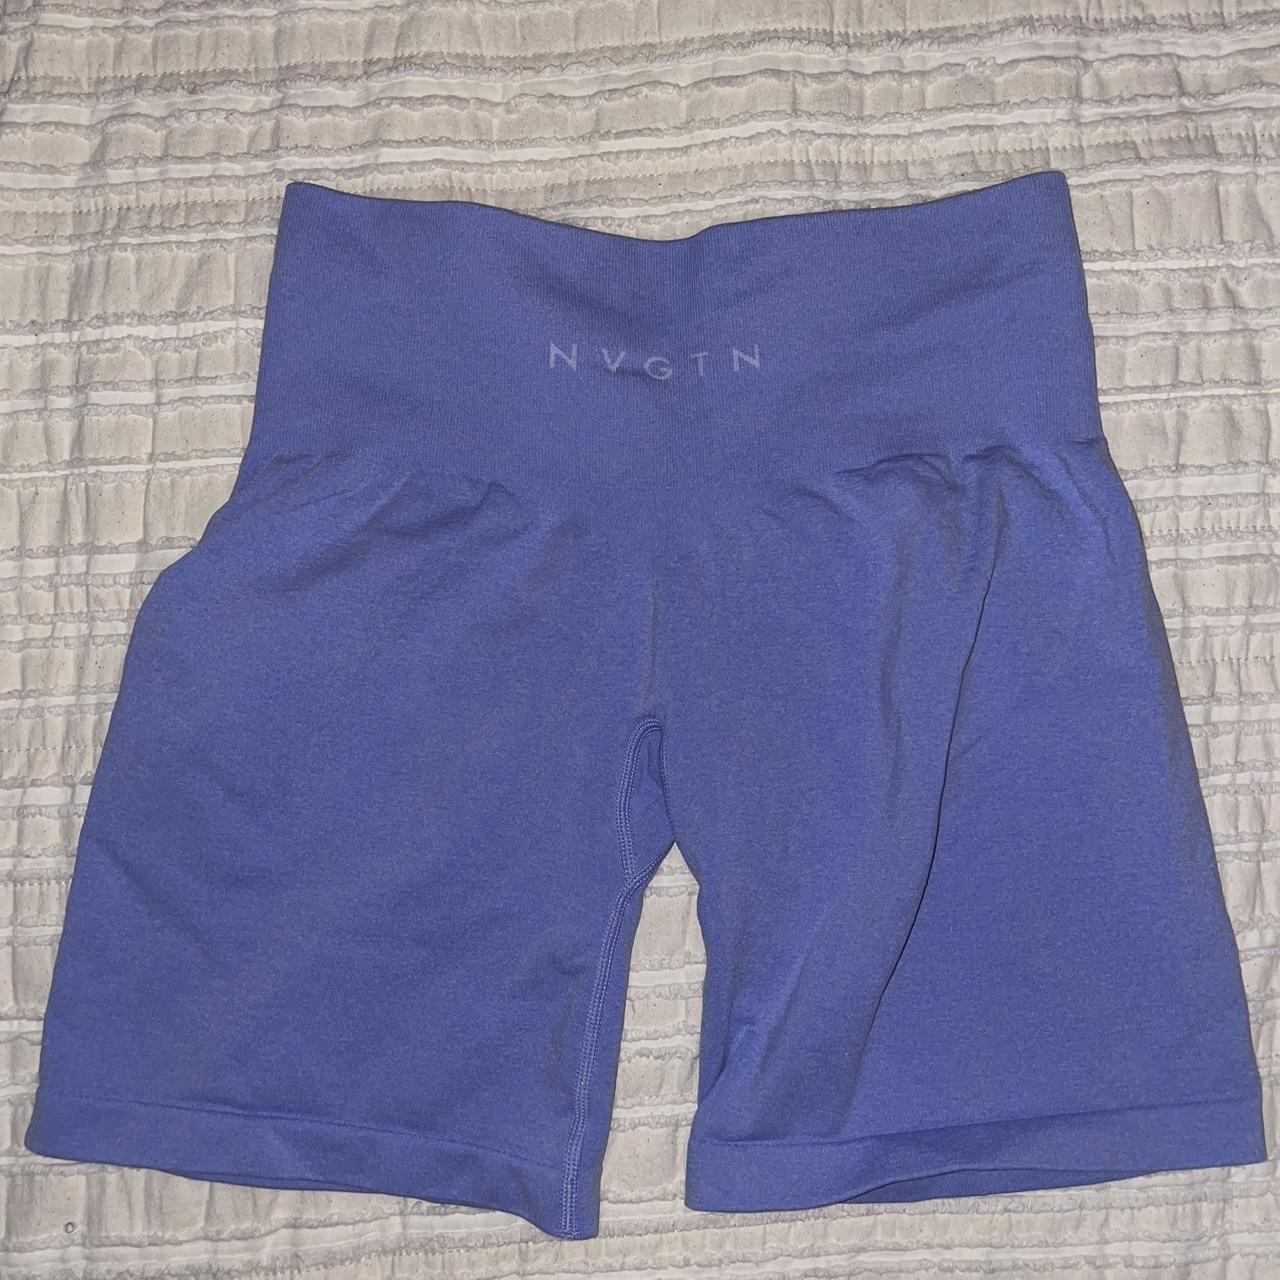 Periwinkle nvgtn shorts, size small. Only tried on. - Depop